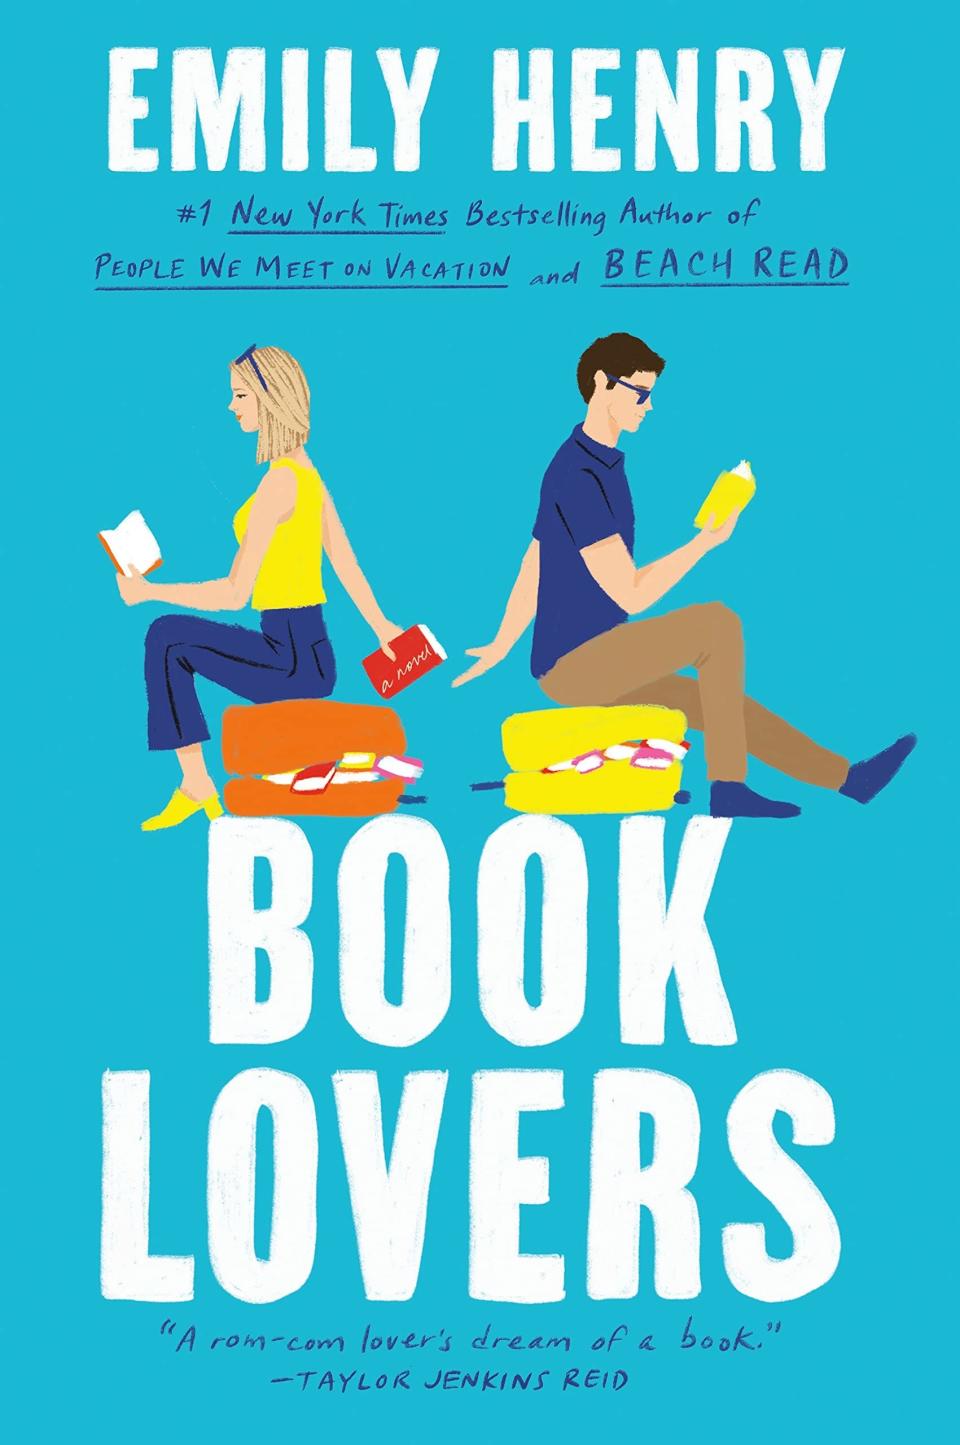 "Book Lovers" cover illustrating a guy and a girl reading books 